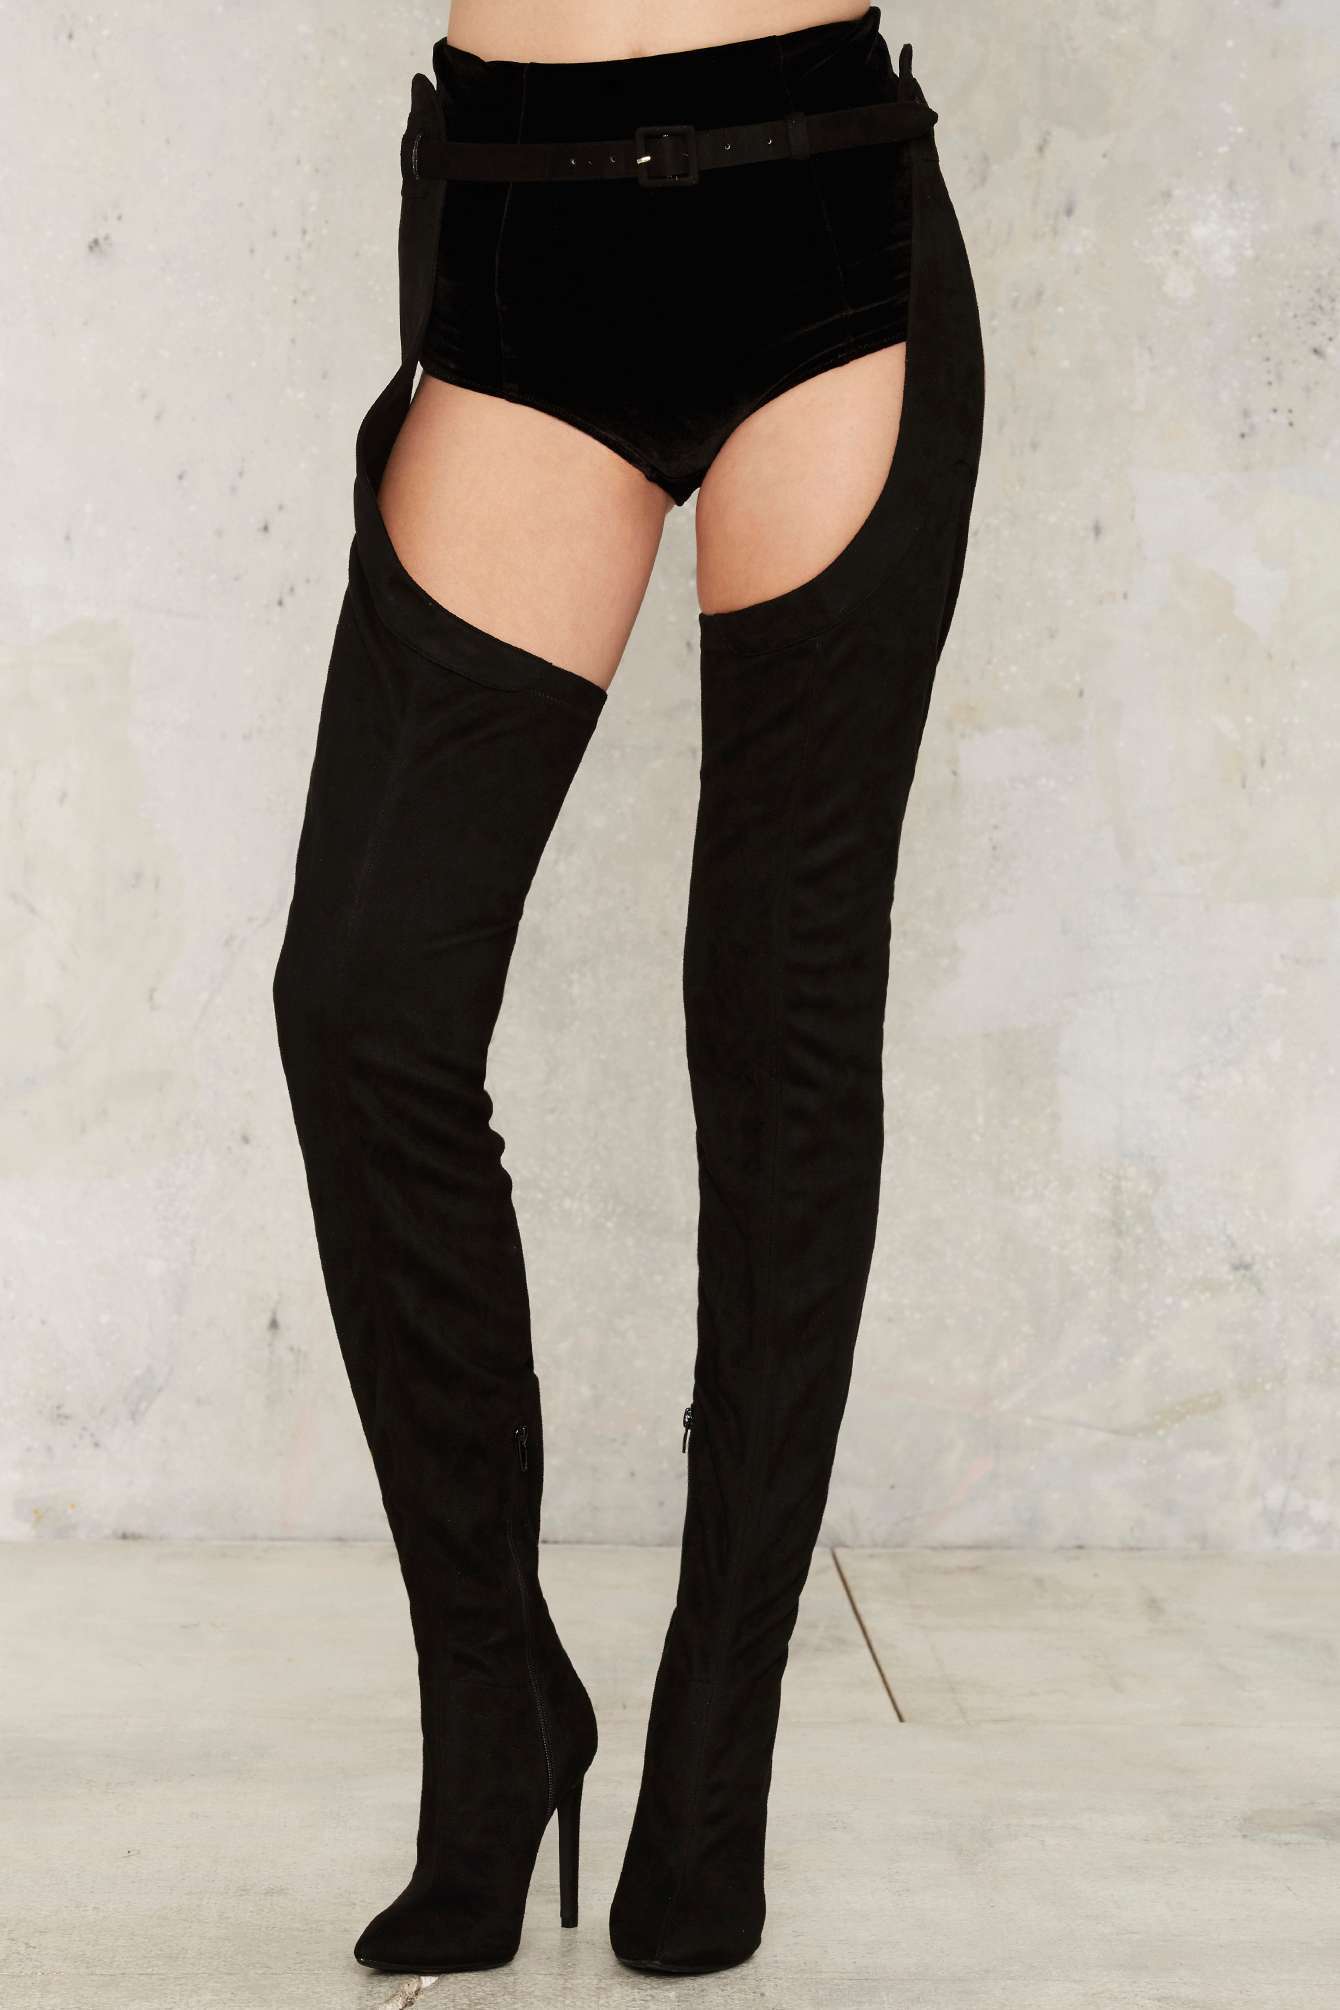 thigh boots with belt attached